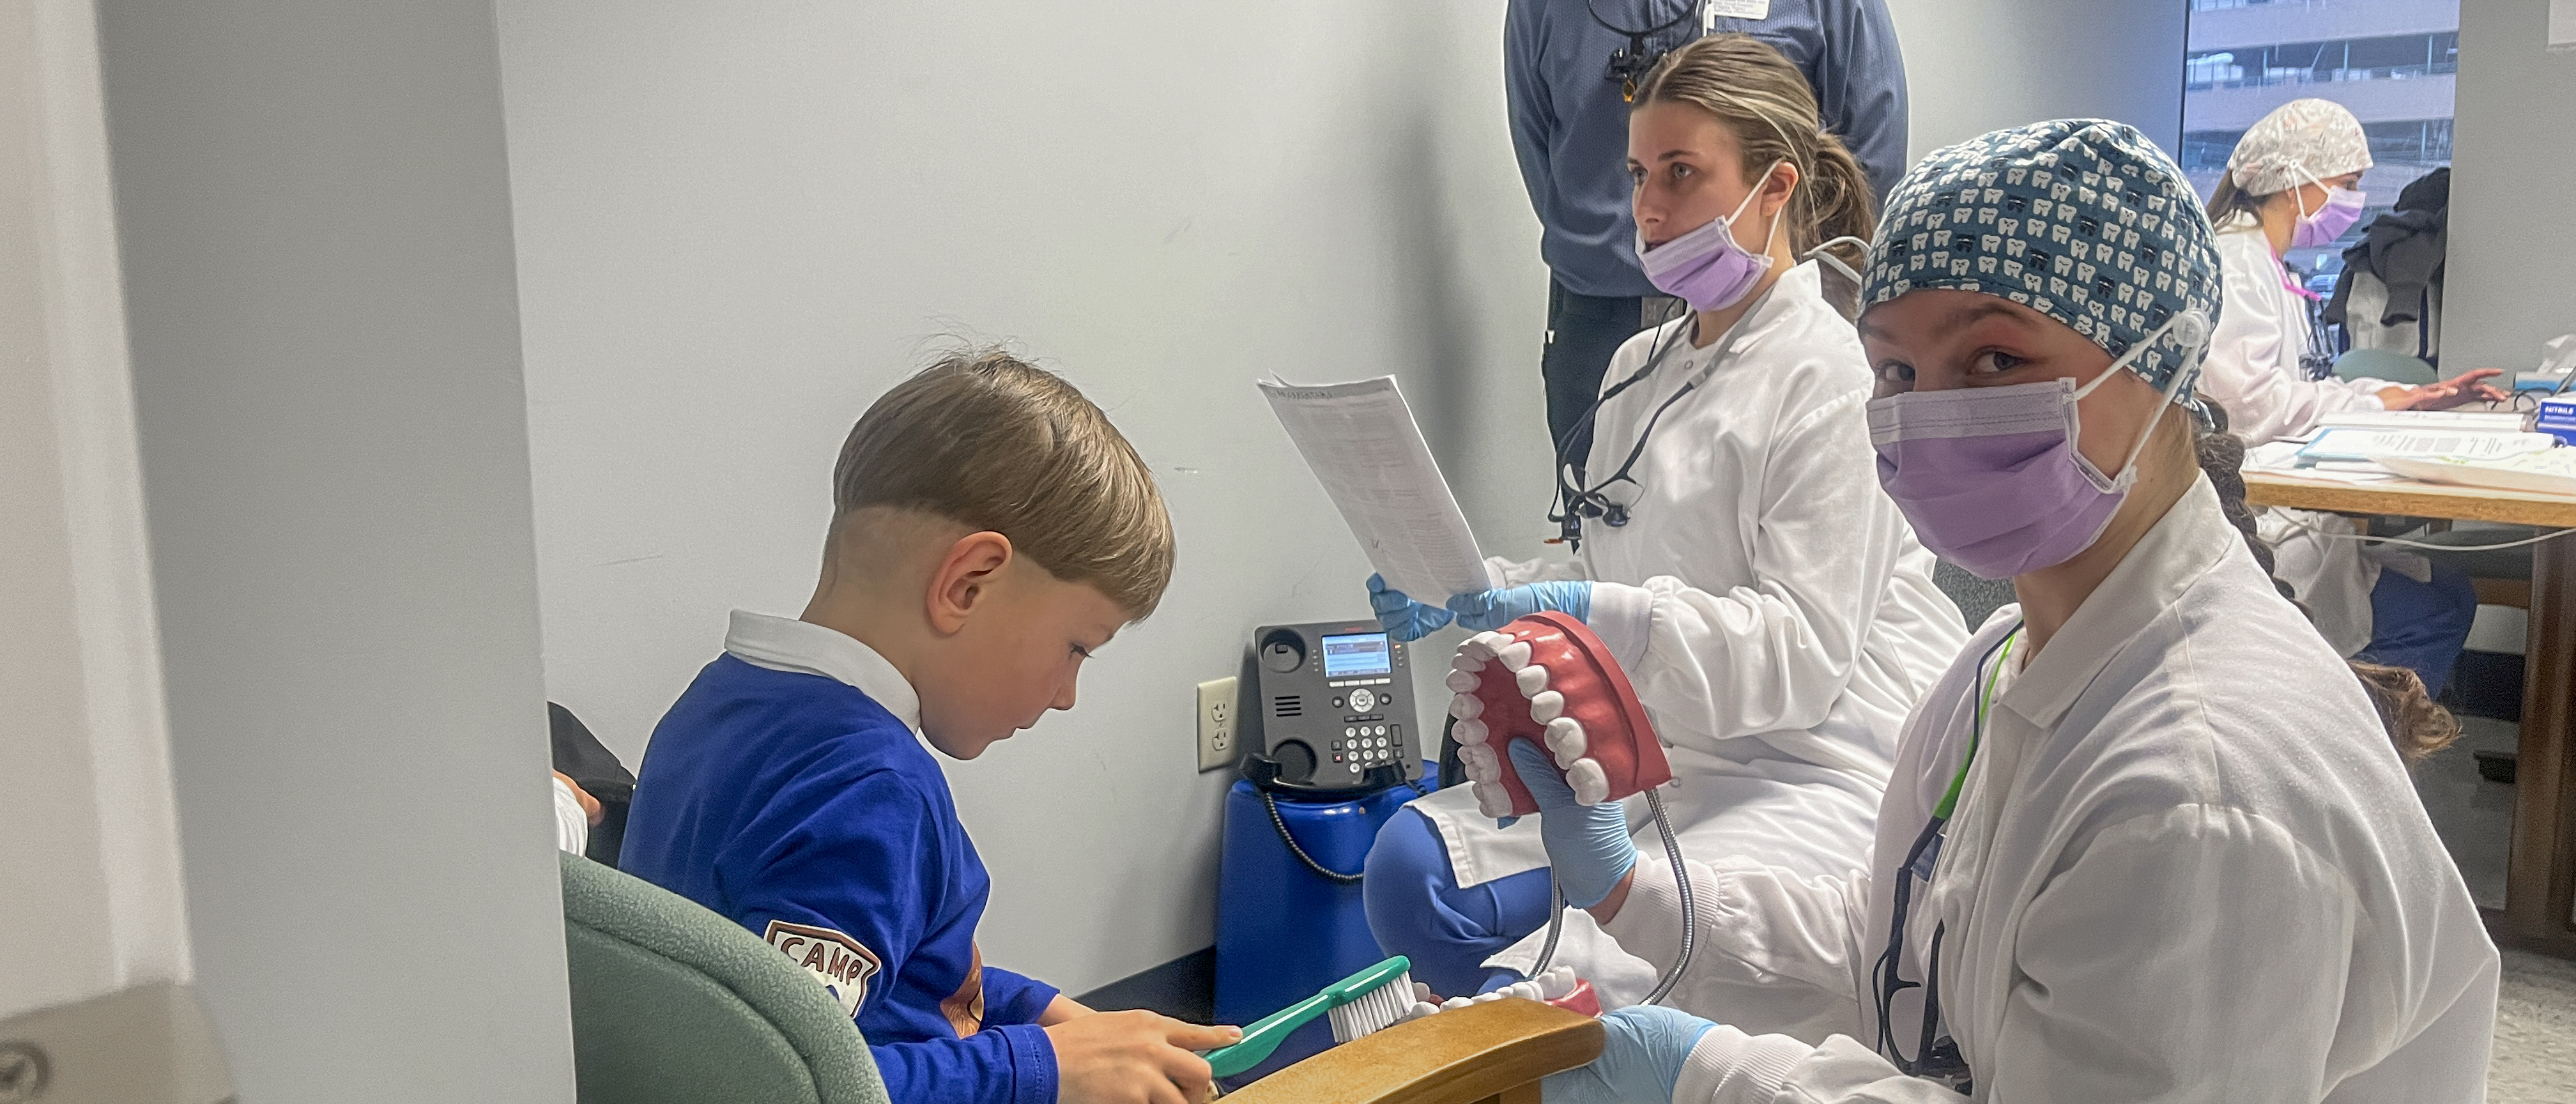 Two UNE dental hygiene students provide dental education to a child at a local social services center